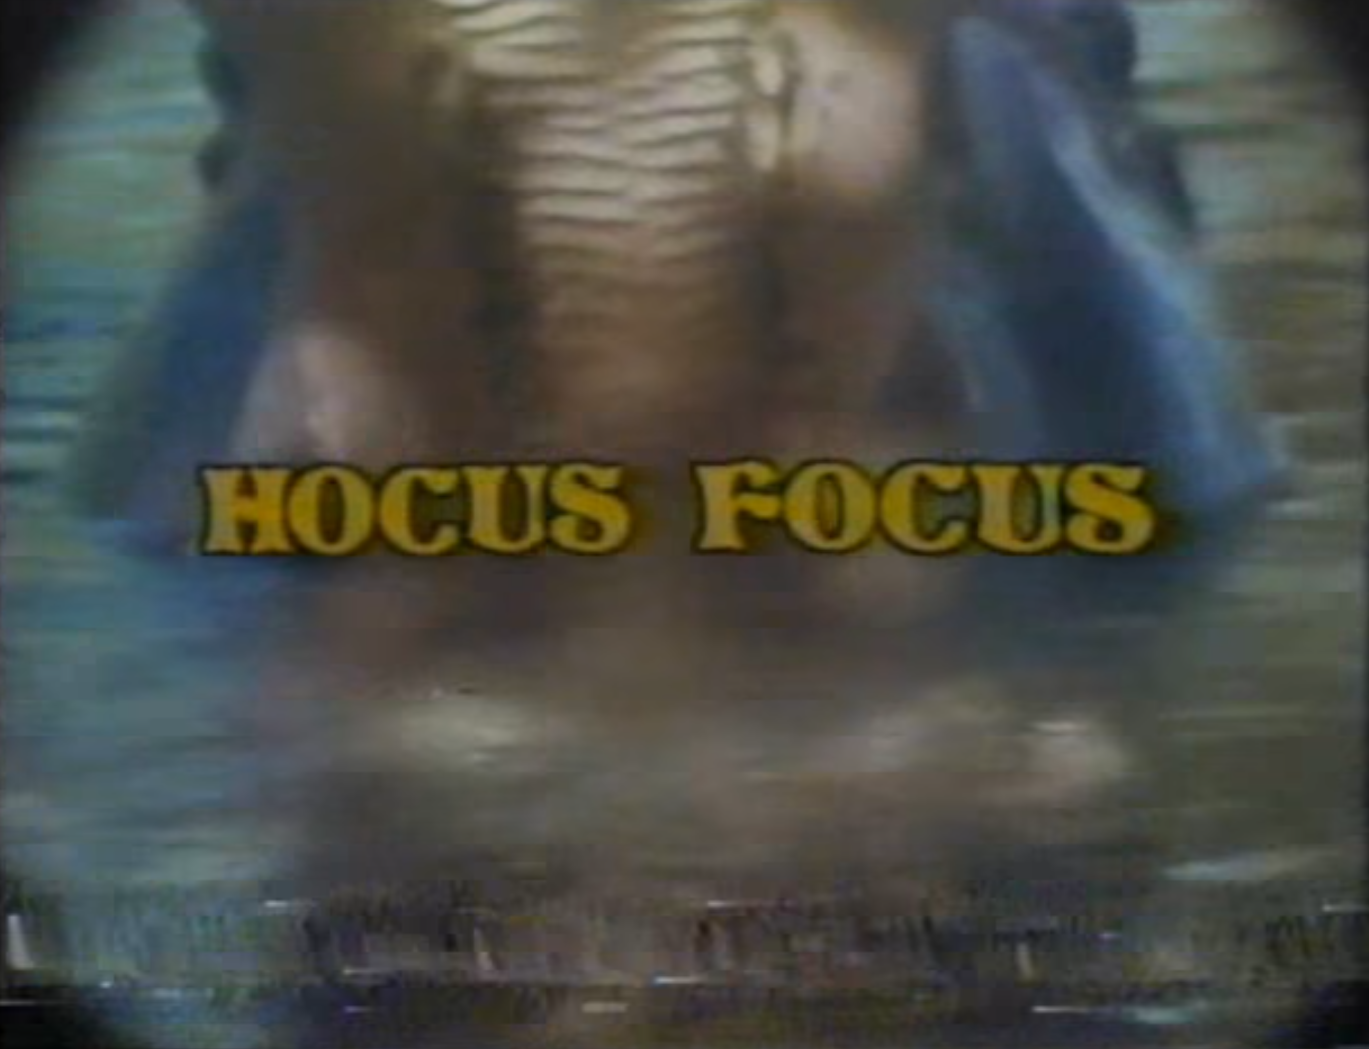 Hocus Focus Episode 25: "What Will You Be" - Hocus Focus (partially found Nickelodeon variety series; 1979-1981)